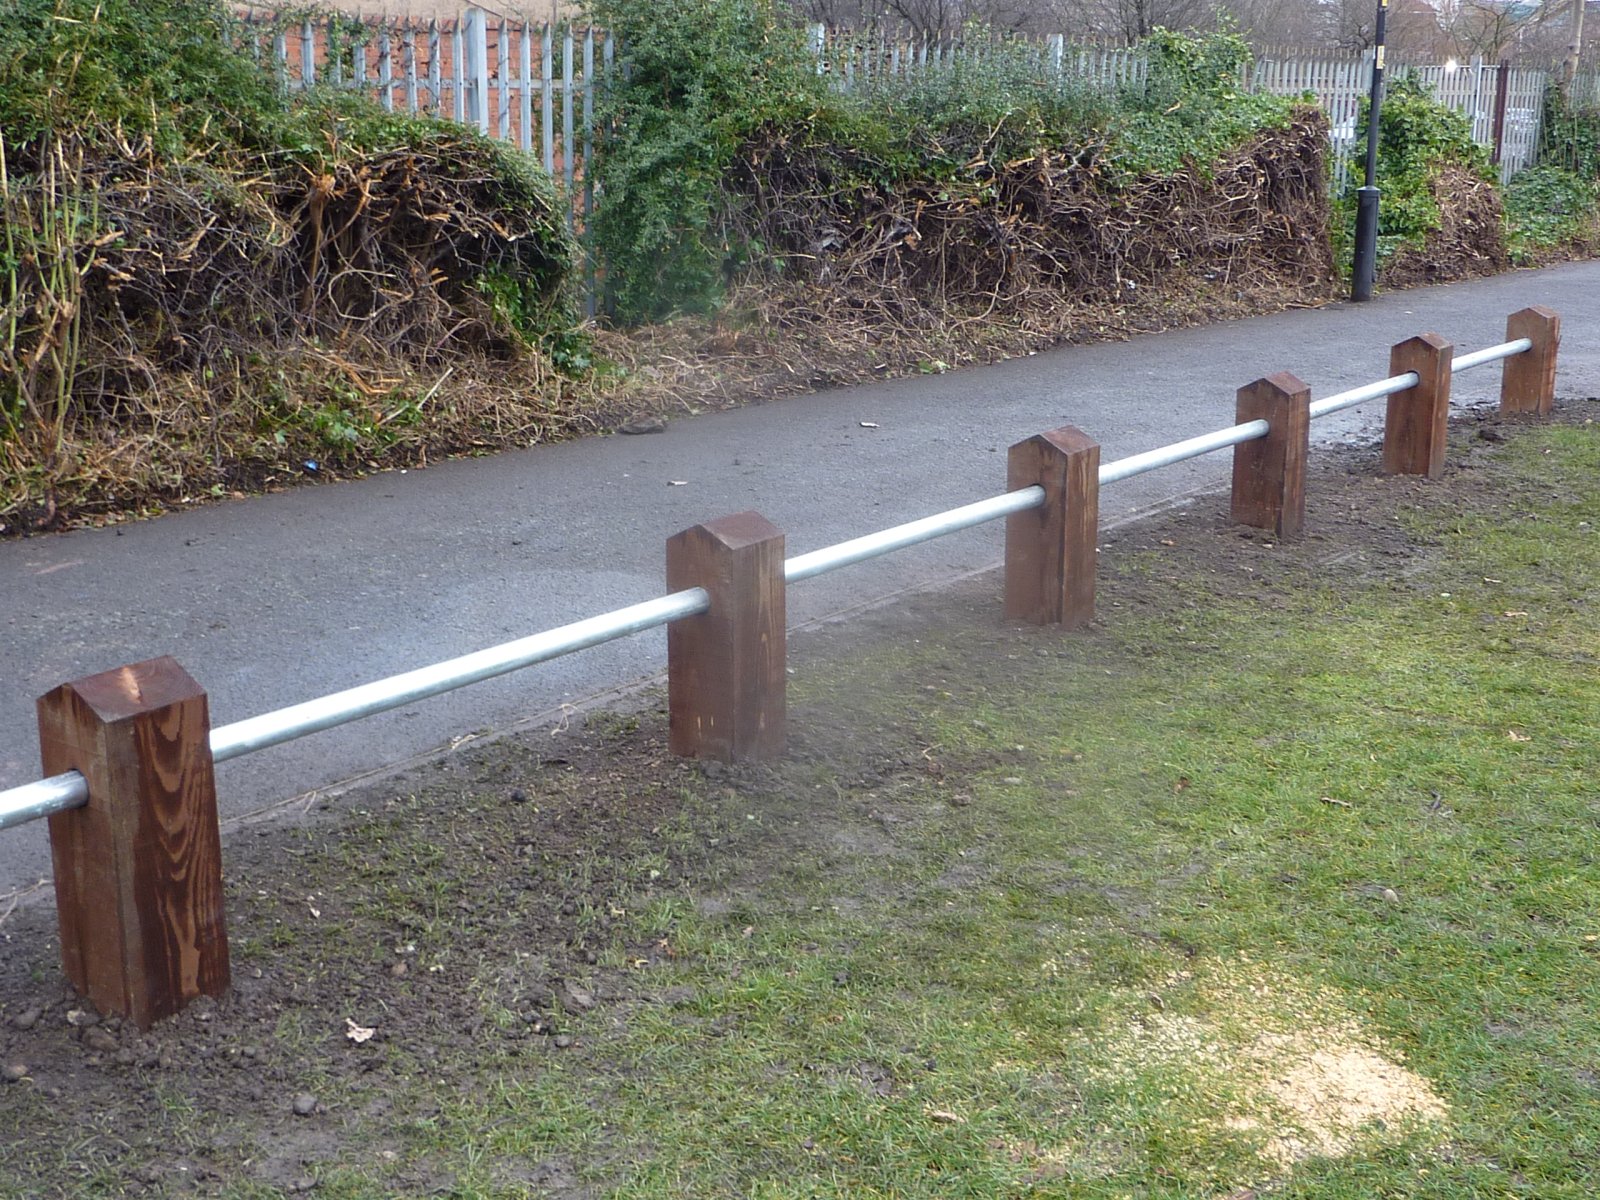 Ditch protection fencing...